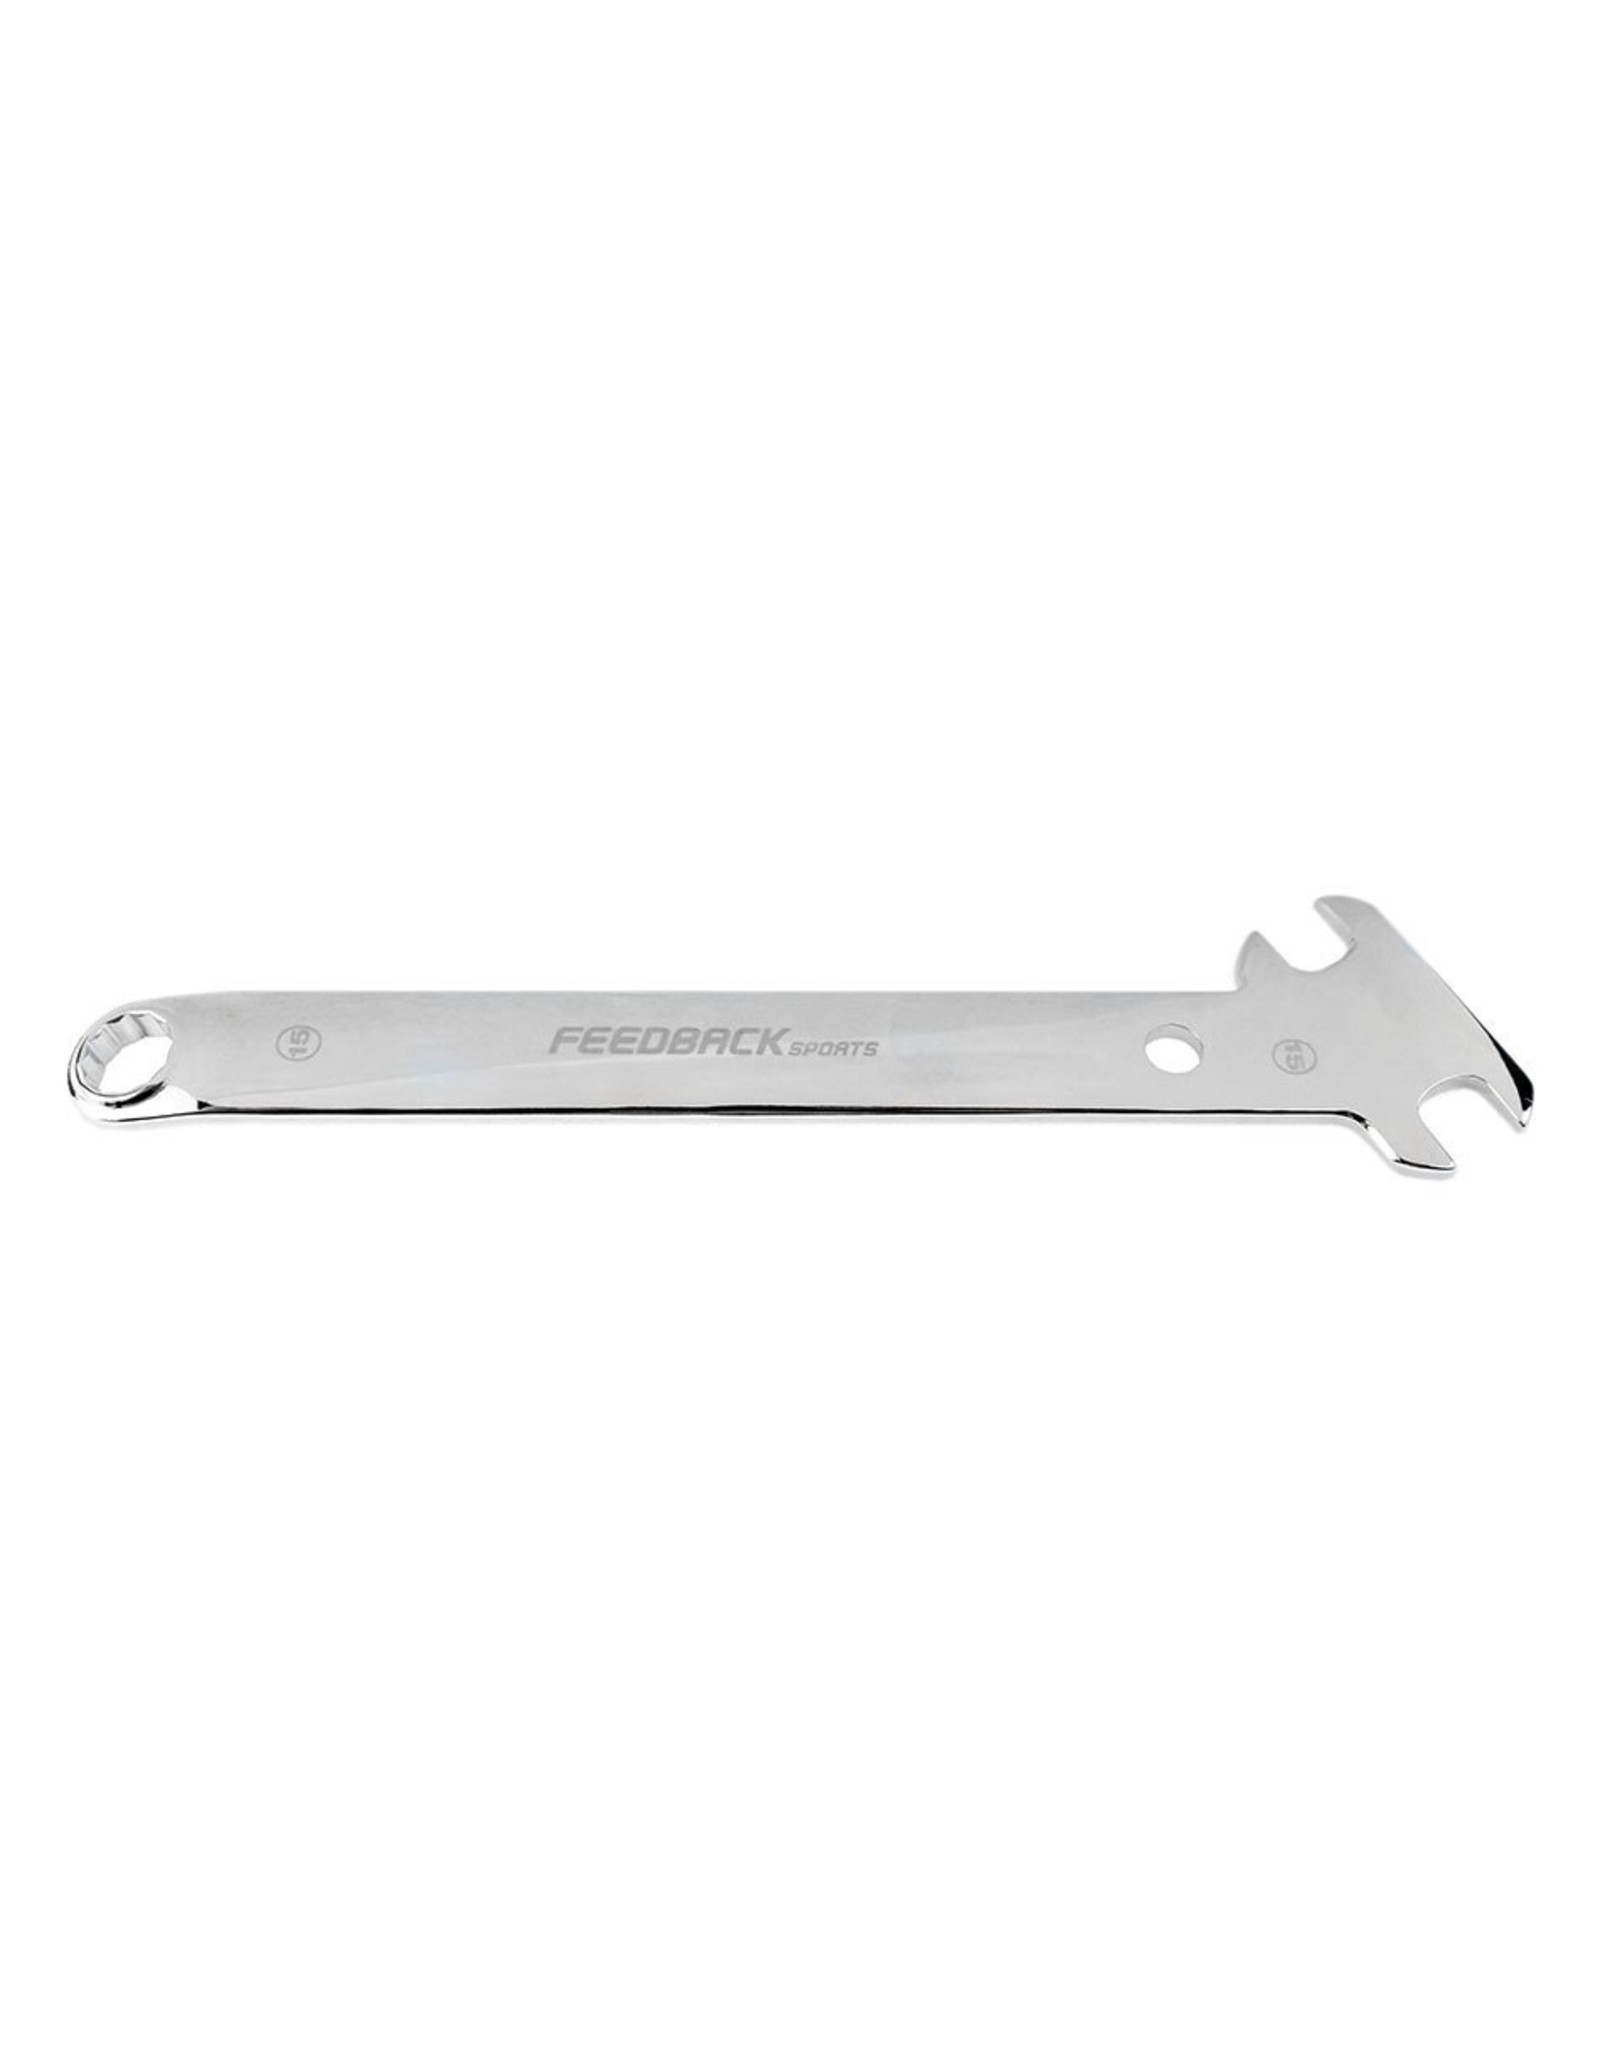 Feedback Sports Feedback Sports 15mm Pedal and Axle Nut Wrench